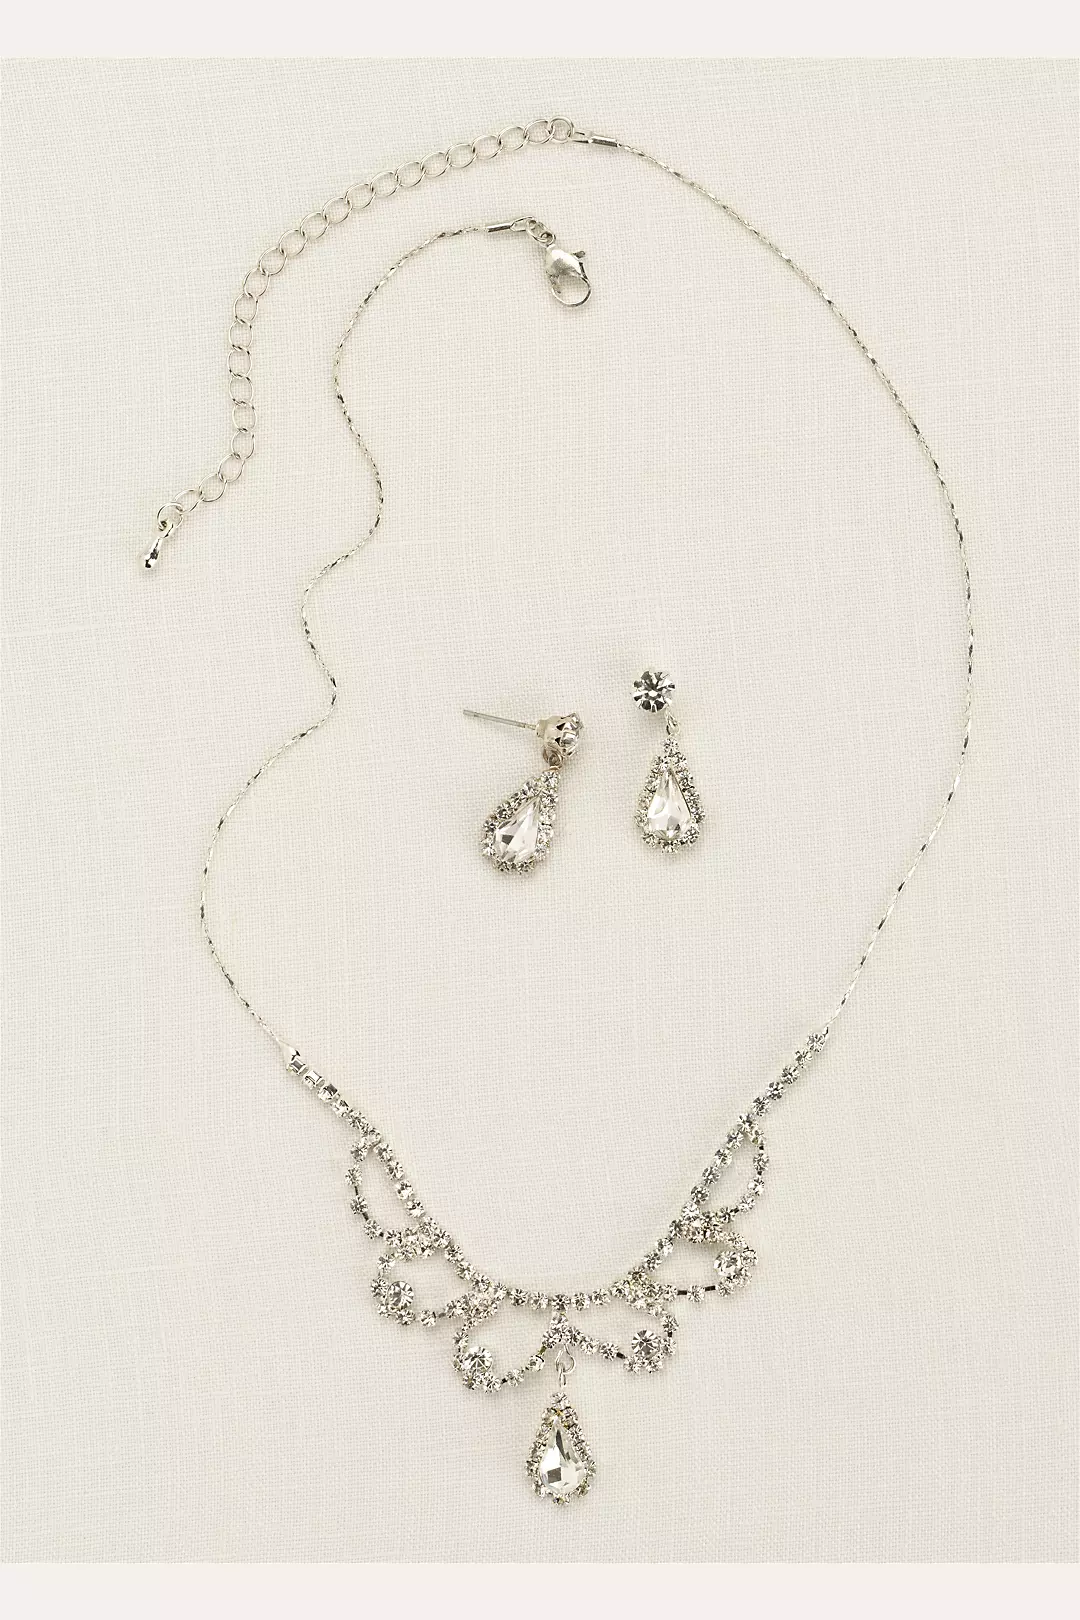 Scalloped Necklace with Pear Shaped Drop Earrings Image